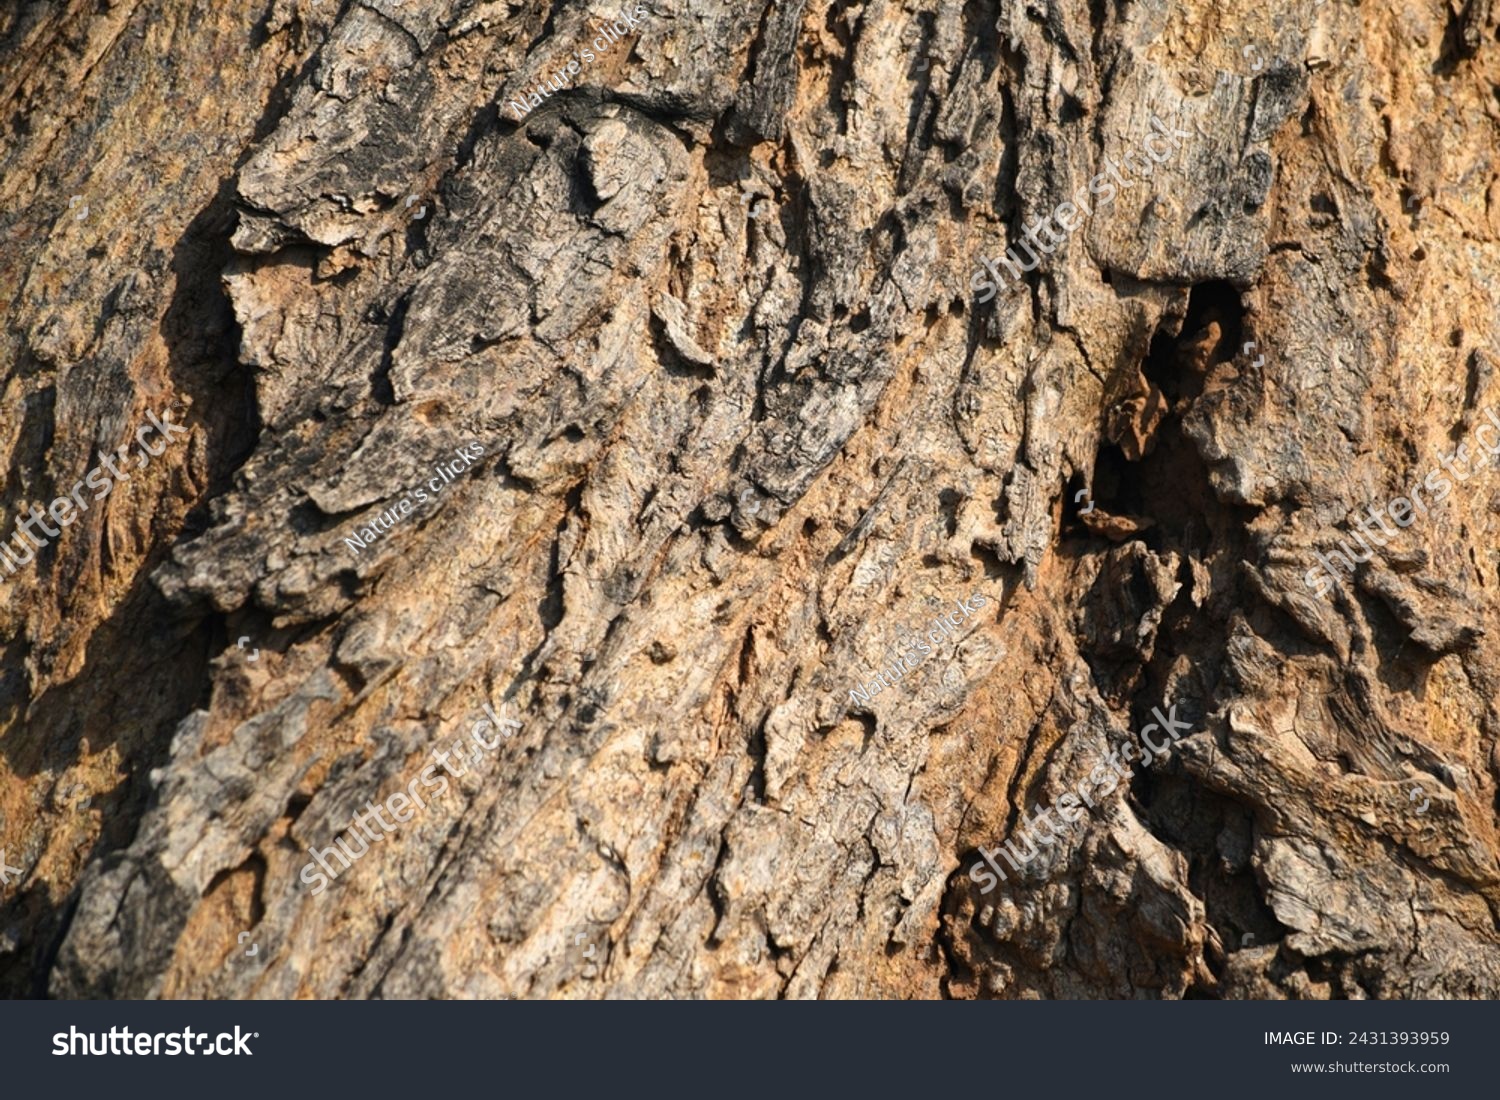 Old tree texture. Bark pattern, For background wood work, Bark of brown hardwood, thick bark hardwood, residential house wood. nature, tree, bark, hardwood, trunk, tree , tree trunk close up texture #2431393959